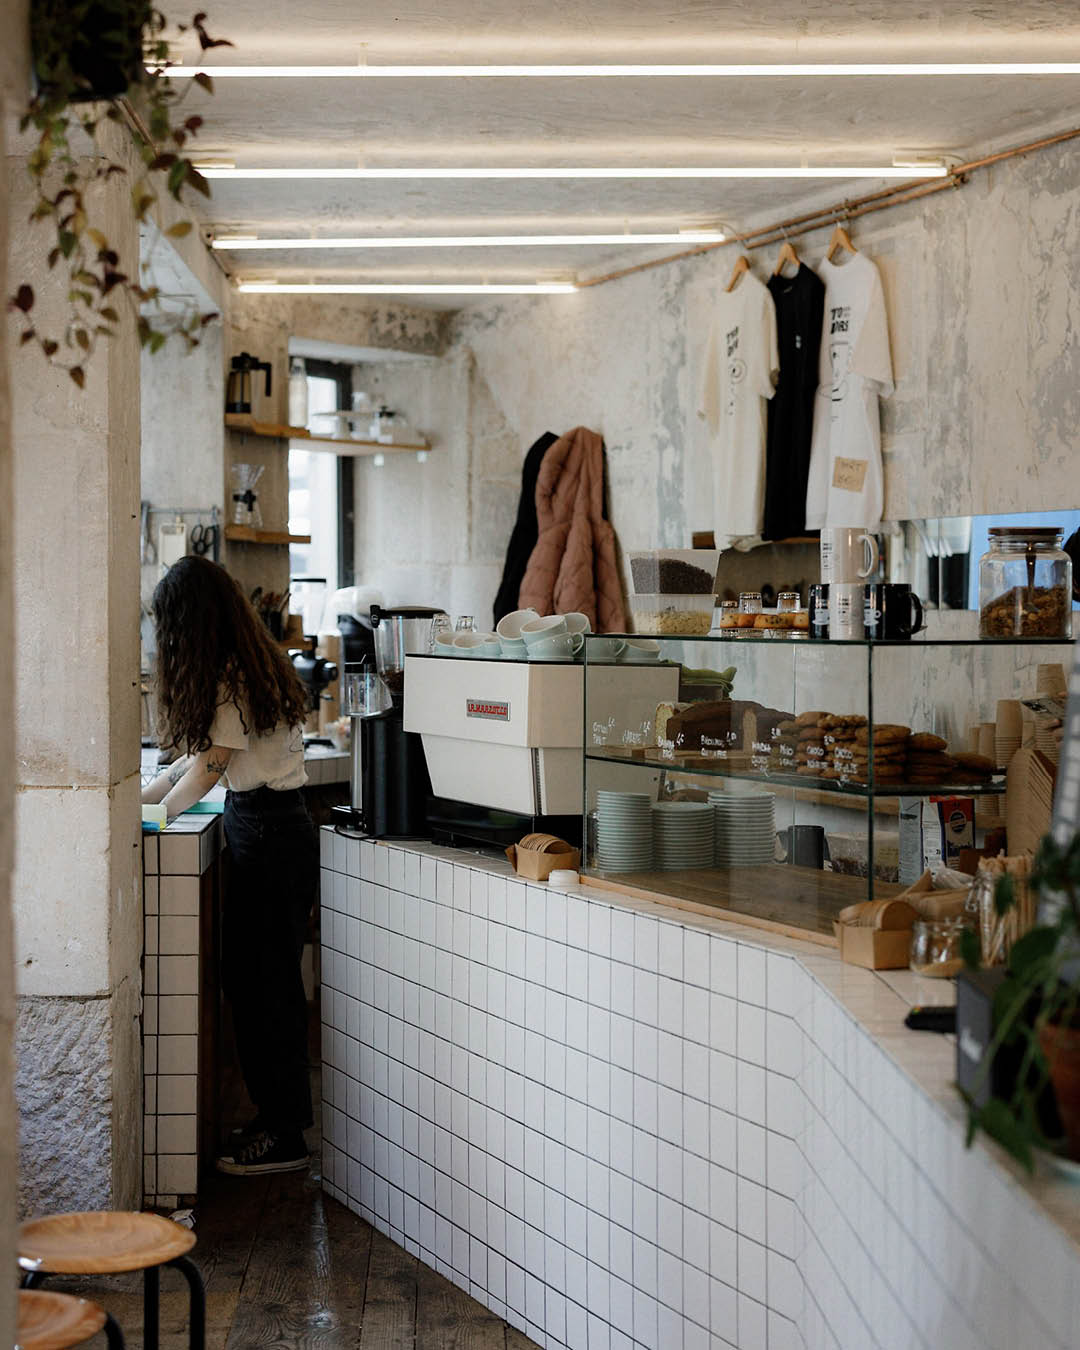 Counter with pastries at Two Doors coffee shop in Paris. Photography by Seb Bicard